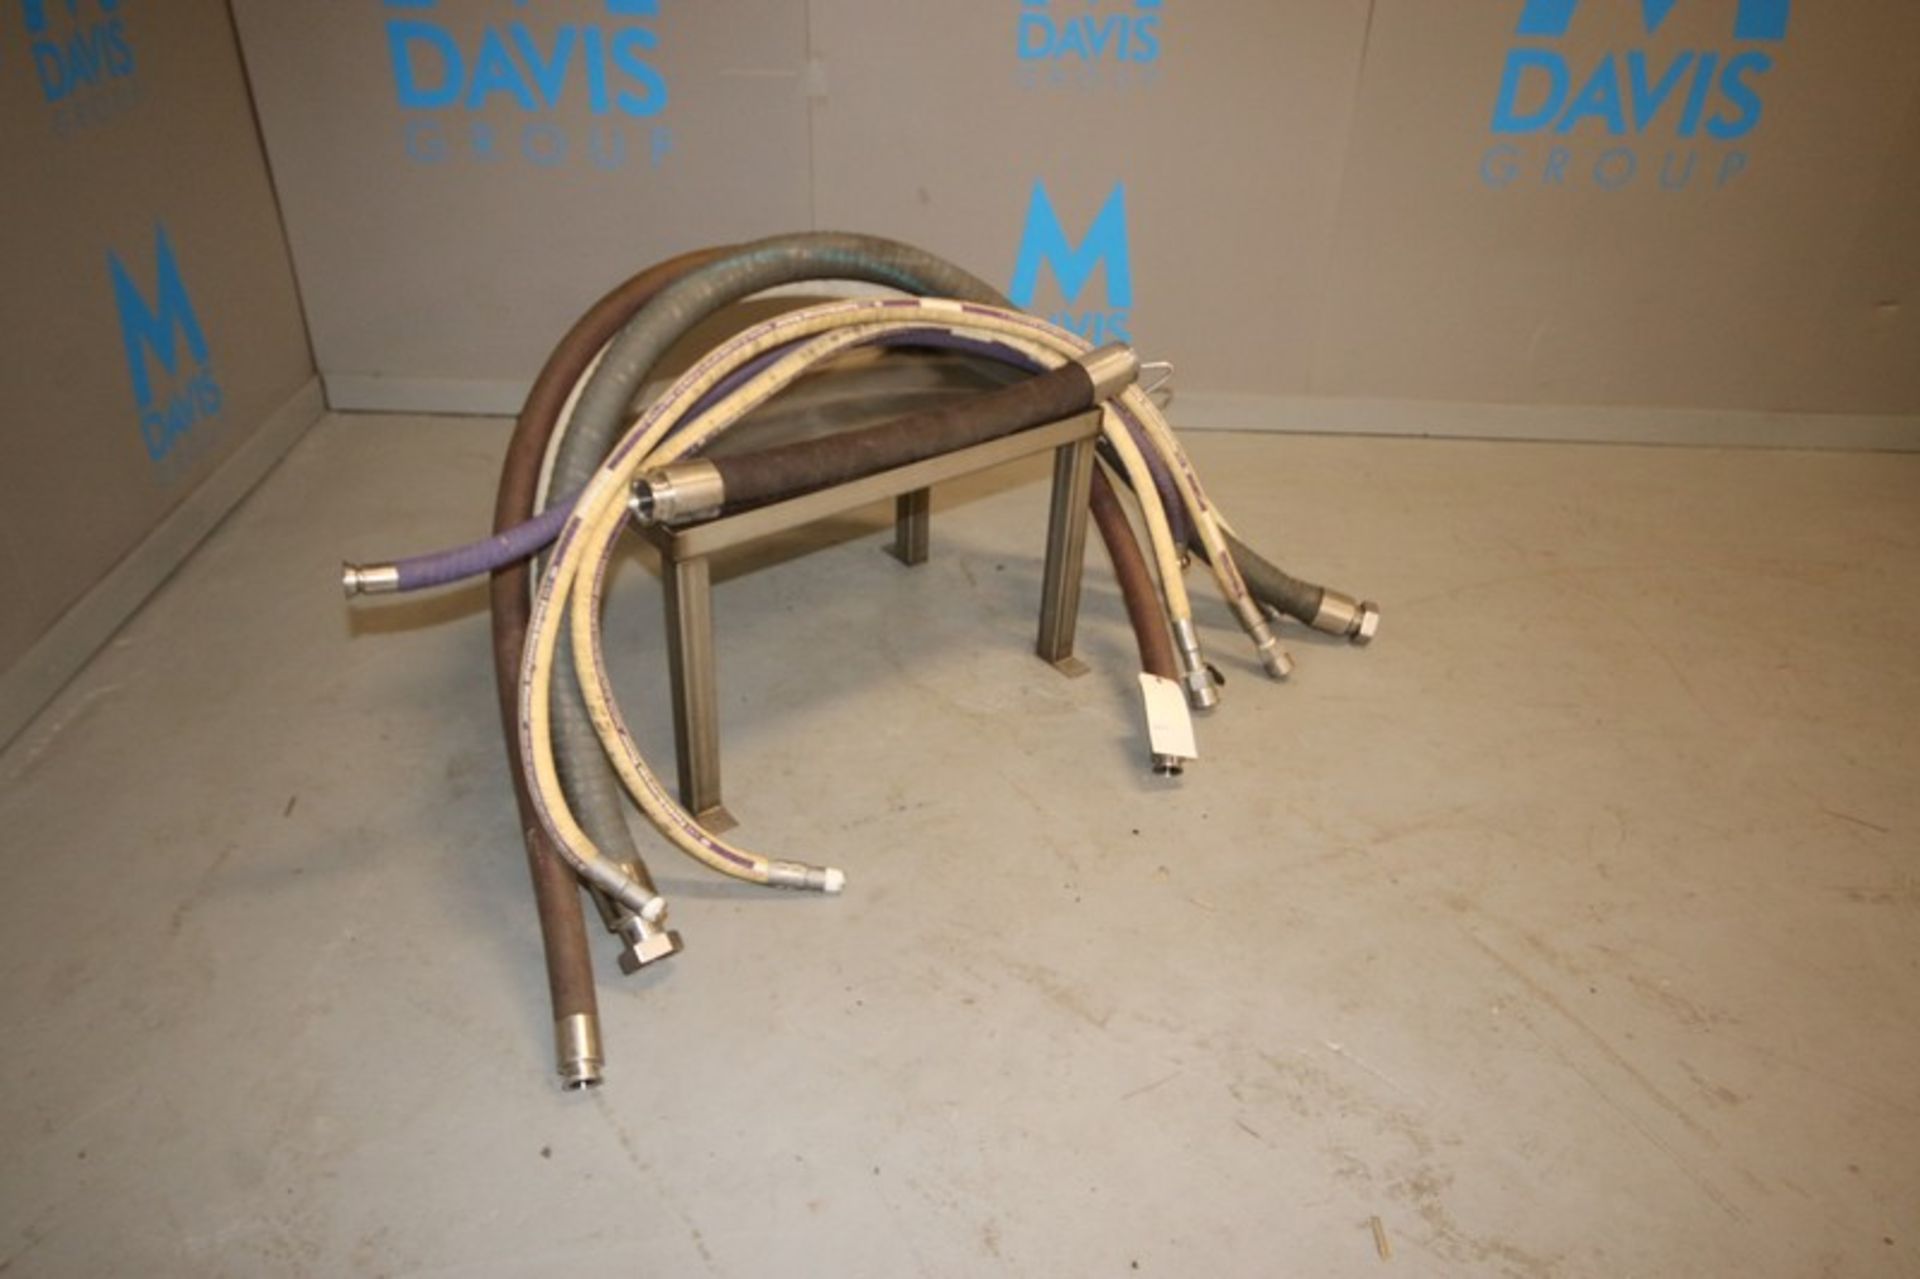 Assorted Transfer Hoses, Length Ranging FromAprox. 35" L - 125" L, Clamp Type, Insert Type, and - Image 2 of 7